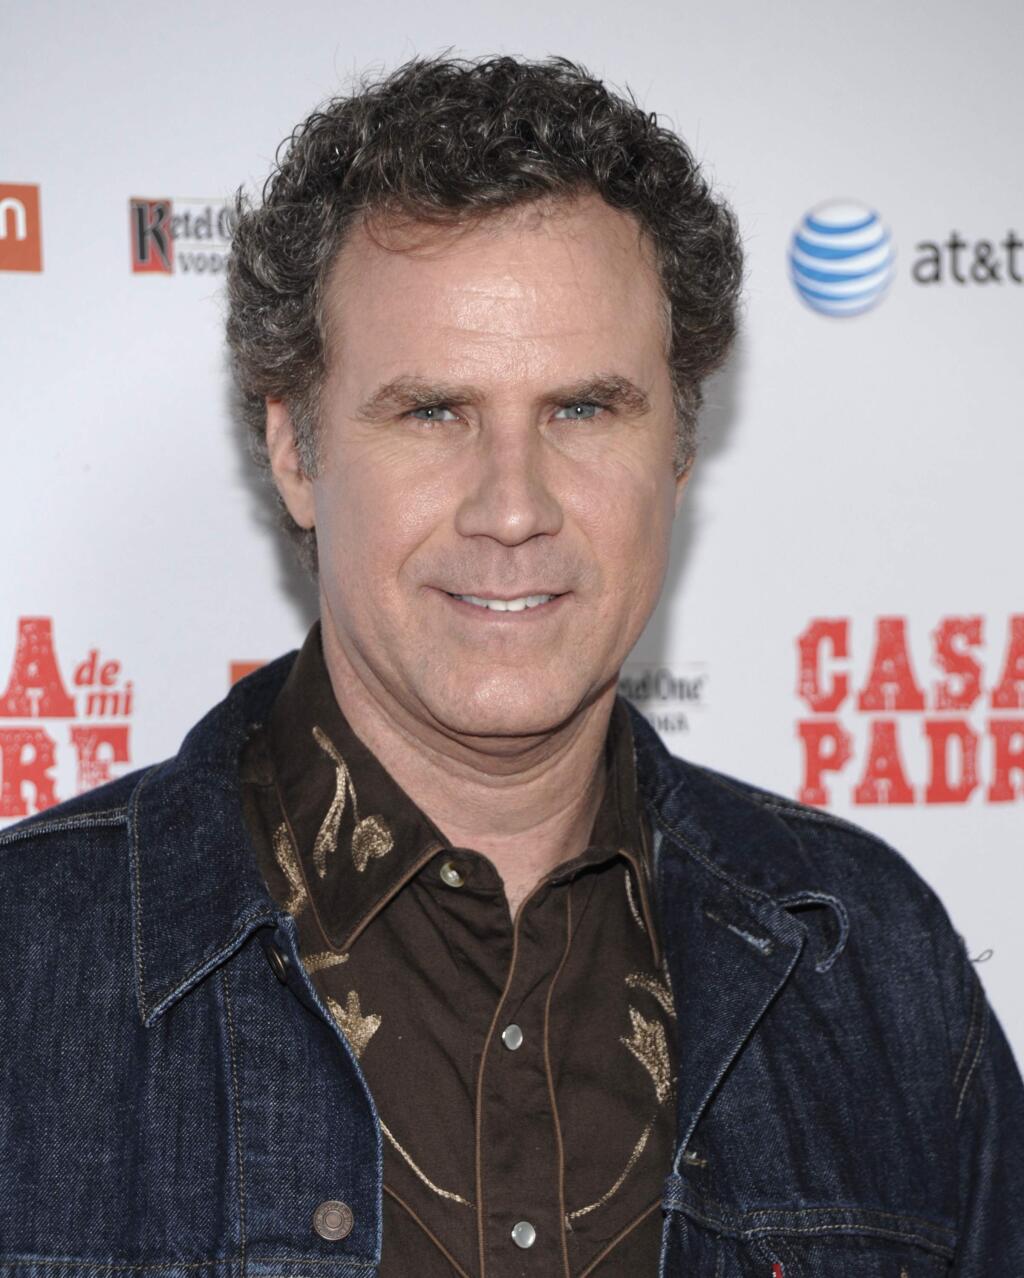 FILE - In this March 14, 2012 file photo Actor Will Farrell arrives at a premiere in Los Angeles. Will Ferrell was treated by paramedics after sustaining minor injuries from a rollover crash on a Los Angeles-area freeway Thursday, April 12, 2018. A California Highway Patrol report says a 2007 Toyota struck the right rear of the limousine SUV after veering into its lane on Interstate 5, causing it to lose control, hit the center divider and overturn. (AP Photo/Dan Steinberg,File)